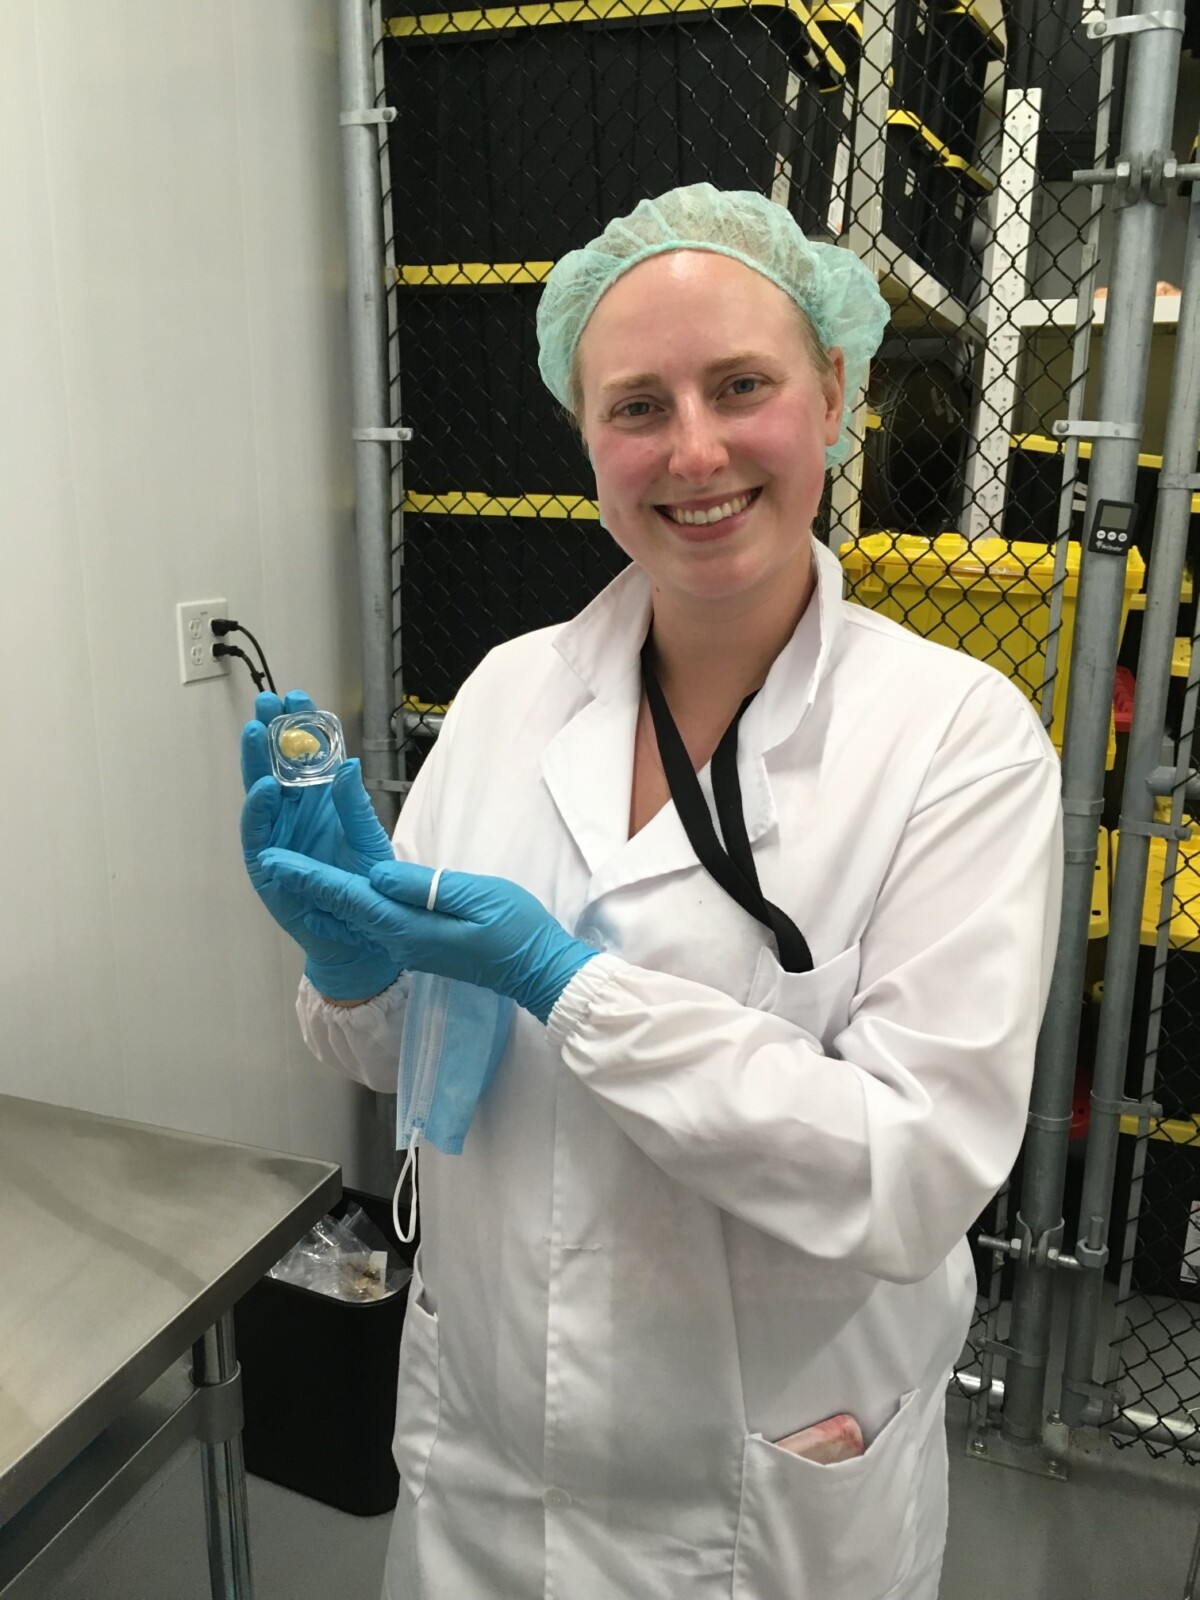 Alannah Davis, Chief Executive Officer & QAP of Dabble Cannabis Co., in a lab coat and hairnet, smiling as she holds up a glass container with cannabis concentrates.